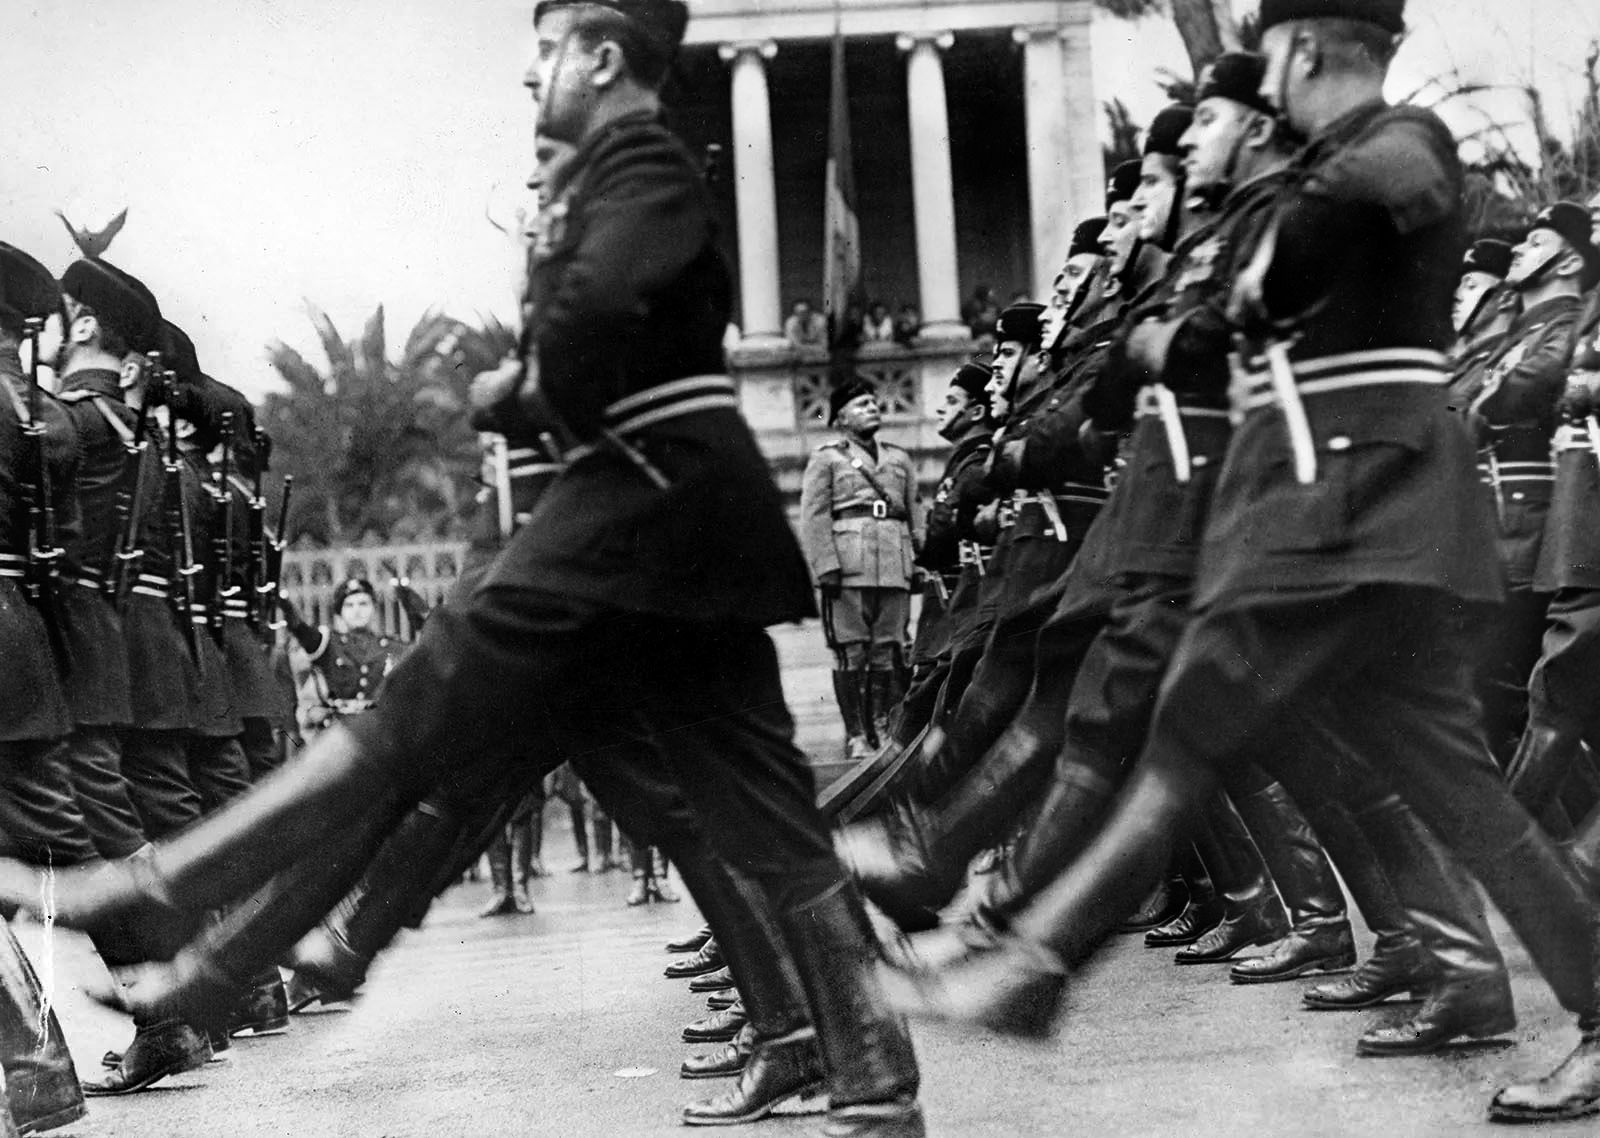 Italian dictator Benito Mussolini (center) reviews his goose-stepping troops during a parade in Rome early in the war when fortunes were smiling on the Axis powers.